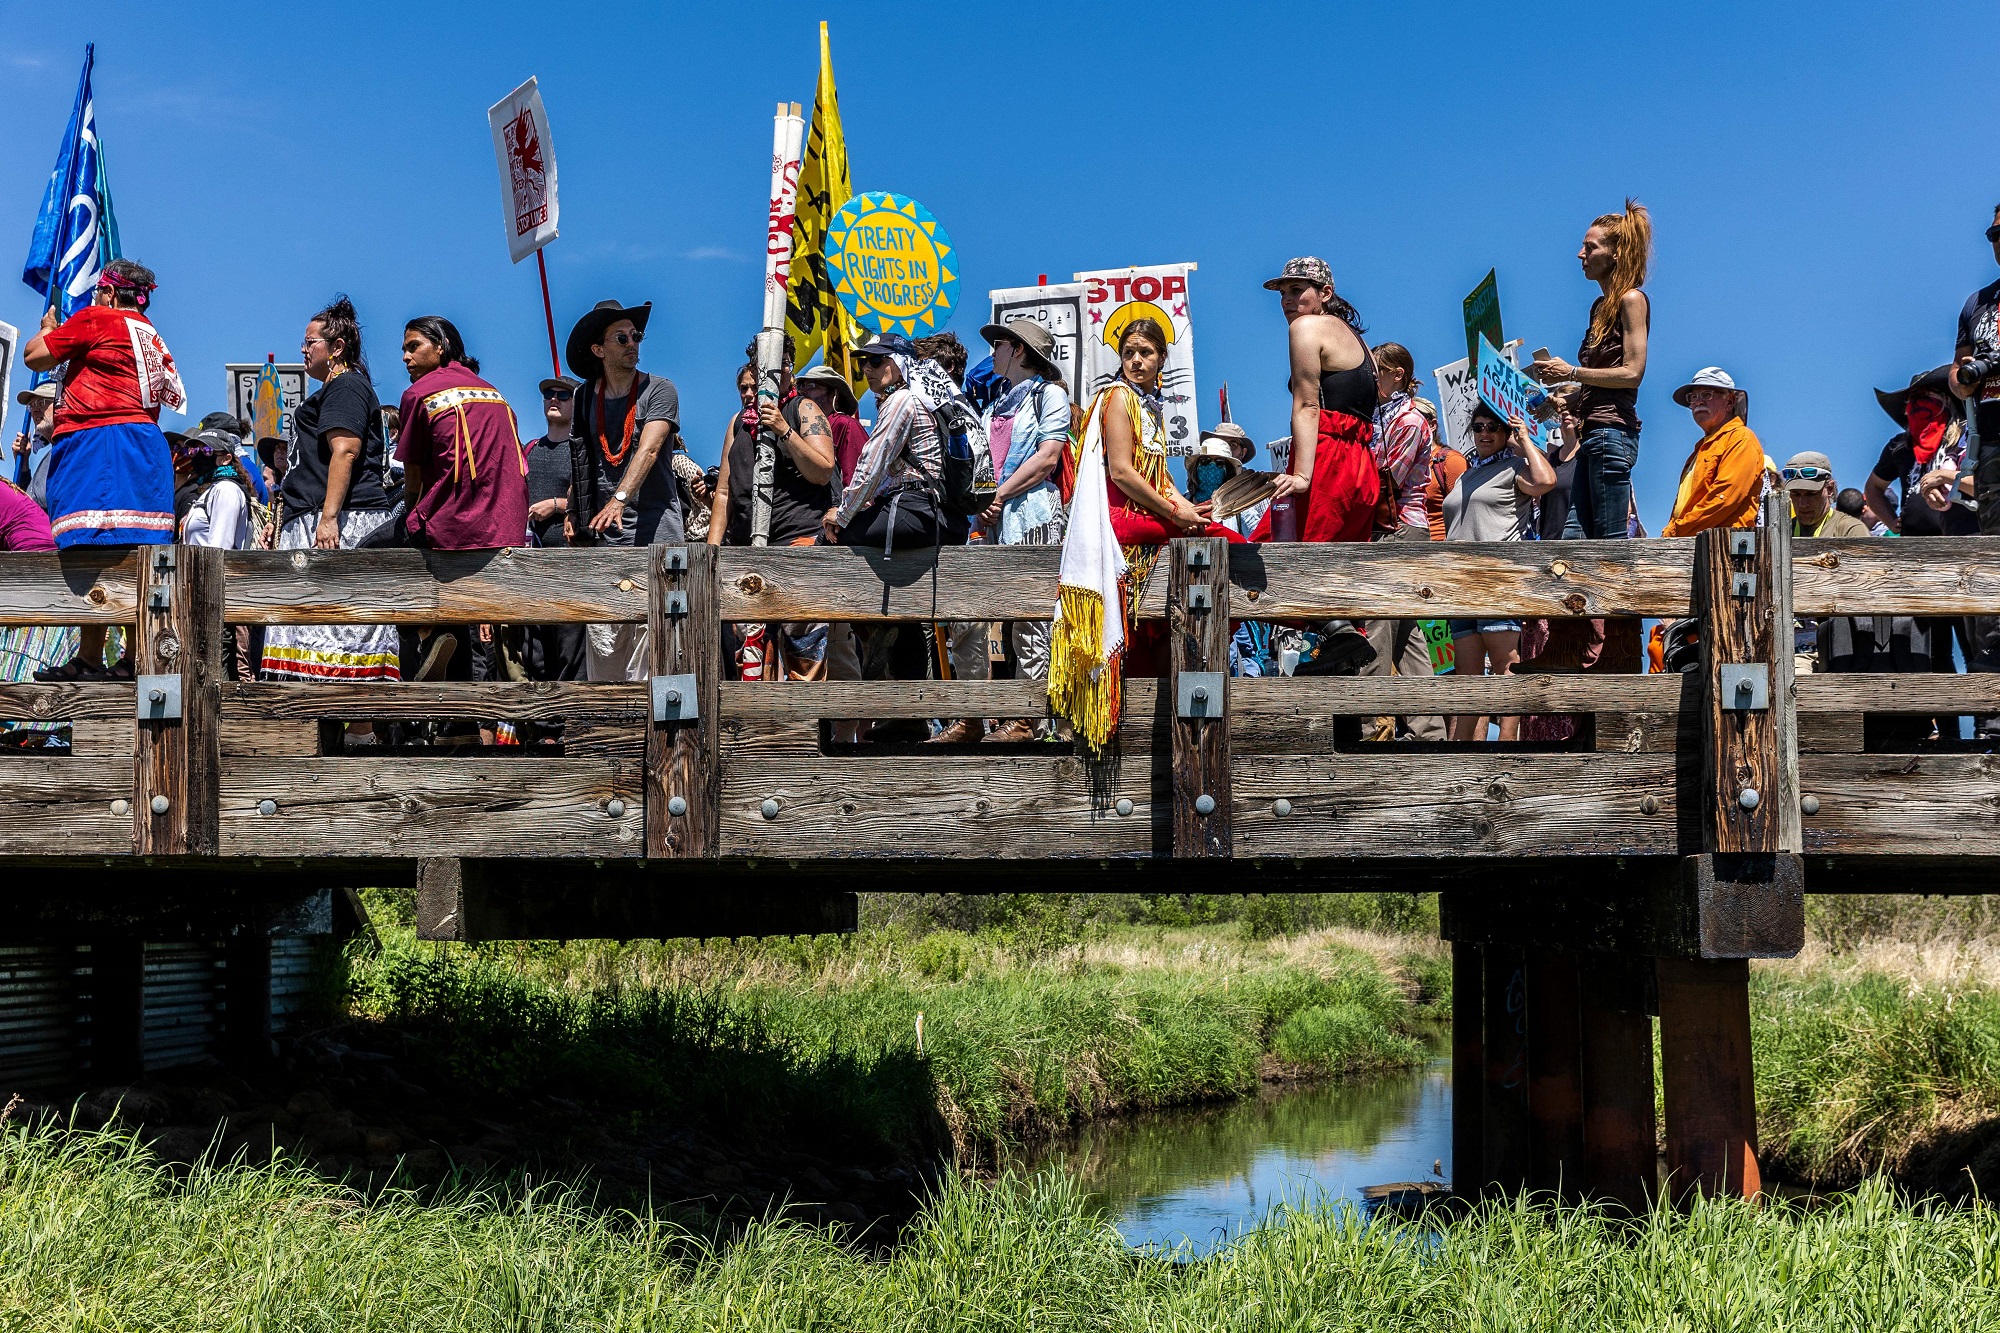 Activists in Indigenous clothing and with no pipeline signs protesting Line 3 on a bridge in Minnesota